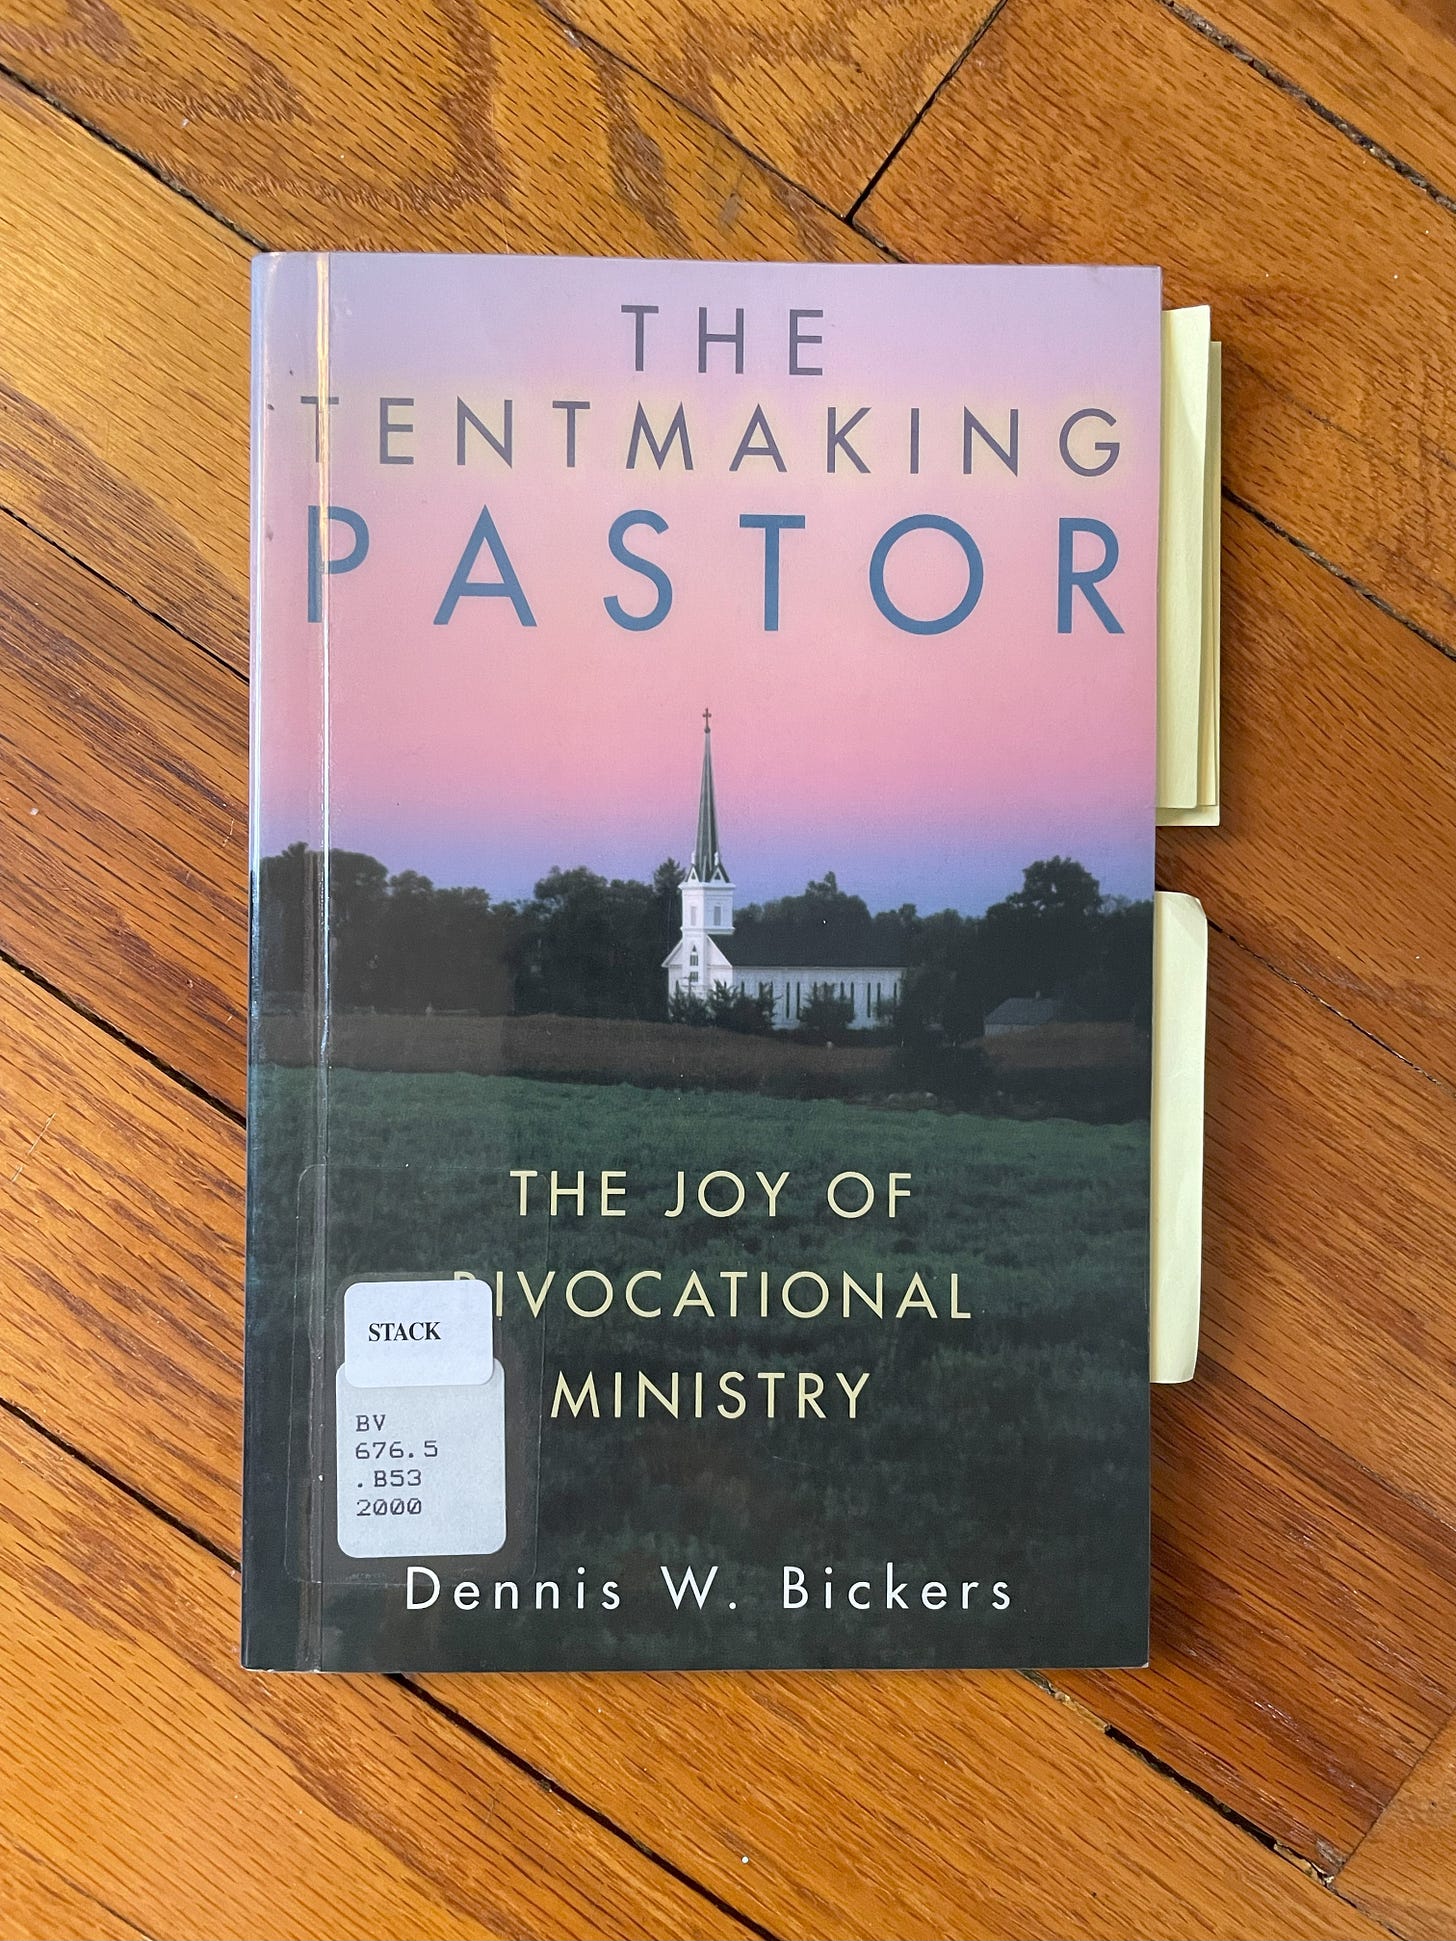 The book discussed, The Tentmaking Pastor, laying on a hardwood floor